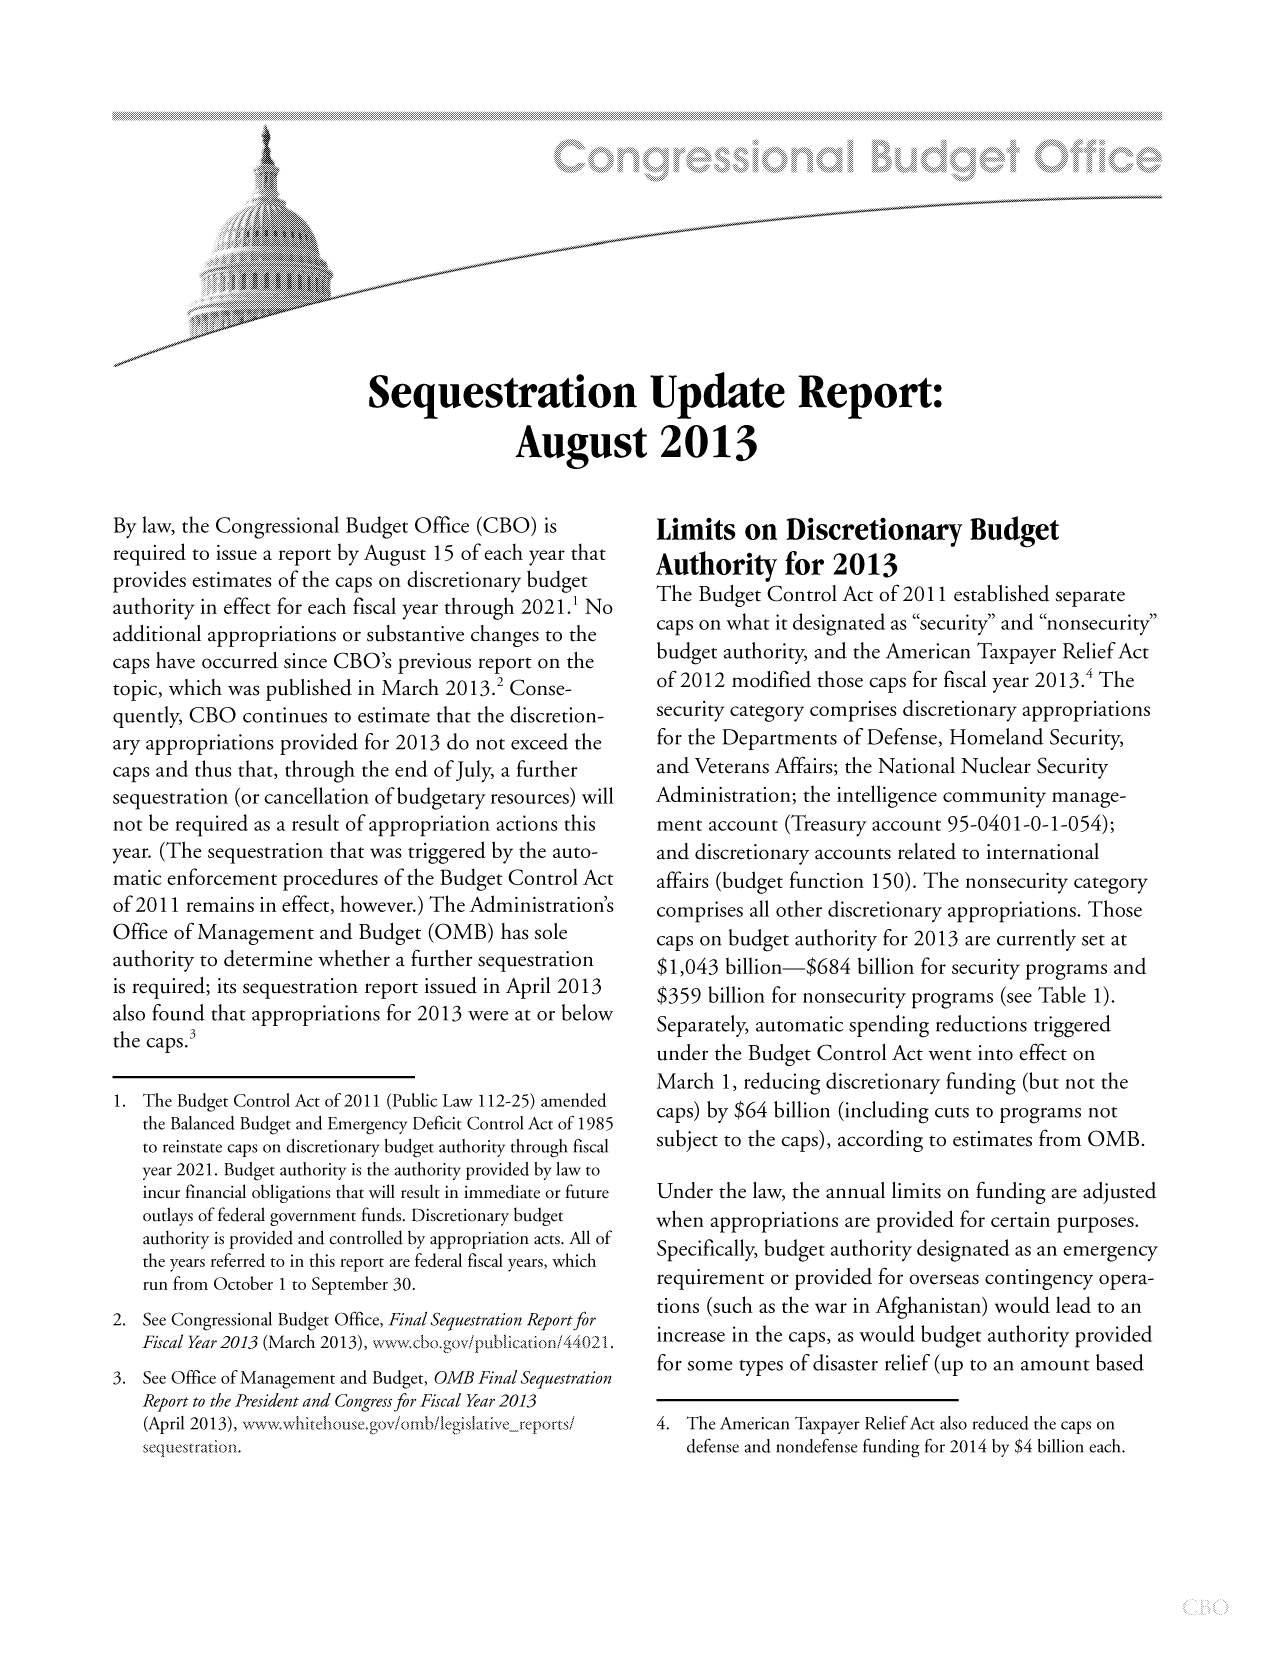 handle is hein.congrec/cbo11213 and id is 1 raw text is: Sequestration Update Report:
August 2013

By law, the Congressional Budget Office (CBO) is
required to issue a report by August 15 of each year that
provides estimates of the caps on discretionary budget
authority in effect for each fiscal year through 2021.1 No
additional appropriations or substantive changes to the
caps have occurred since CBO's previous report on the
topic, which was published in March 2013.2 Conse-
quently, CBO continues to estimate that the discretion-
ary appropriations provided for 2013 do not exceed the
caps and thus that, through the end of July, a further
sequestration (or cancellation of budgetary resources) will
not be required as a result of appropriation actions this
year. (The sequestration that was triggered by the auto-
matic enforcement procedures of the Budget Control Act
of 2011 remains in effect, however.) The Administration's
Office of Management and Budget (OMB) has sole
authority to determine whether a further sequestration
is required; its sequestration report issued in April 2013
also found that appropriations for 2013 were at or below
the caps.3
1. The Budget Control Act of 2011 (Public Law 112-25) amended
the Balanced Budget and Emergency Deficit Control Act of 1985
to reinstate caps on discretionary budget authority through fiscal
year 2021. Budget authority is the authority provided by law to
incur financial obligations that will result in immediate or future
outlays of federal government funds. Discretionary budget
authority is provided and controlled by appropriation acts. All of
the years referred to in this report are federal fiscal years, which
run from October 1 to September 30.
2. See Congressional Budget Office, Final Sequestration Report for
Fiscal Year 2013 (March 2013), wwwcbo.gov/publicatioi44021.
3. See Office of Management and Budget, OMB Final Sequestration
Report to the President and Congress for Fiscal Year 2013
(April 2013), wv -whitehouse.gov/omb/legislativereportsi
sequestration.

Limits on Discretionary Budget
Authority for 2013
The Budget Control Act of 2011 established separate
caps on what it designated as security and nonsecurity
budget authority, and the American Taxpayer Relief Act
of 2012 modified those caps for fiscal year 2013.4 The
security category comprises discretionary appropriations
for the Departments of Defense, Homeland Security,
and Veterans Affairs; the National Nuclear Security
Administration; the intelligence community manage-
ment account (Treasury account 95-0401-0-1-054);
and discretionary accounts related to international
affairs (budget function 150). The nonsecurity category
comprises all other discretionary appropriations. Those
caps on budget authority for 2013 are currently set at
$1,043 billion-$684 billion for security programs and
$359 billion for nonsecurity programs (see Table 1).
Separately, automatic spending reductions triggered
under the Budget Control Act went into effect on
March 1, reducing discretionary funding (but not the
caps) by $64 billion (including cuts to programs not
subject to the caps), according to estimates from OMB.
Under the law, the annual limits on funding are adjusted
when appropriations are provided for certain purposes.
Specifically, budget authority designated as an emergency
requirement or provided for overseas contingency opera-
tions (such as the war in Afghanistan) would lead to an
increase in the caps, as would budget authority provided
for some types of disaster relief (up to an amount based
4. The American Taxpayer Relief Act also reduced the caps on
defense and nondefense funding for 2014 by $4 billion each.


